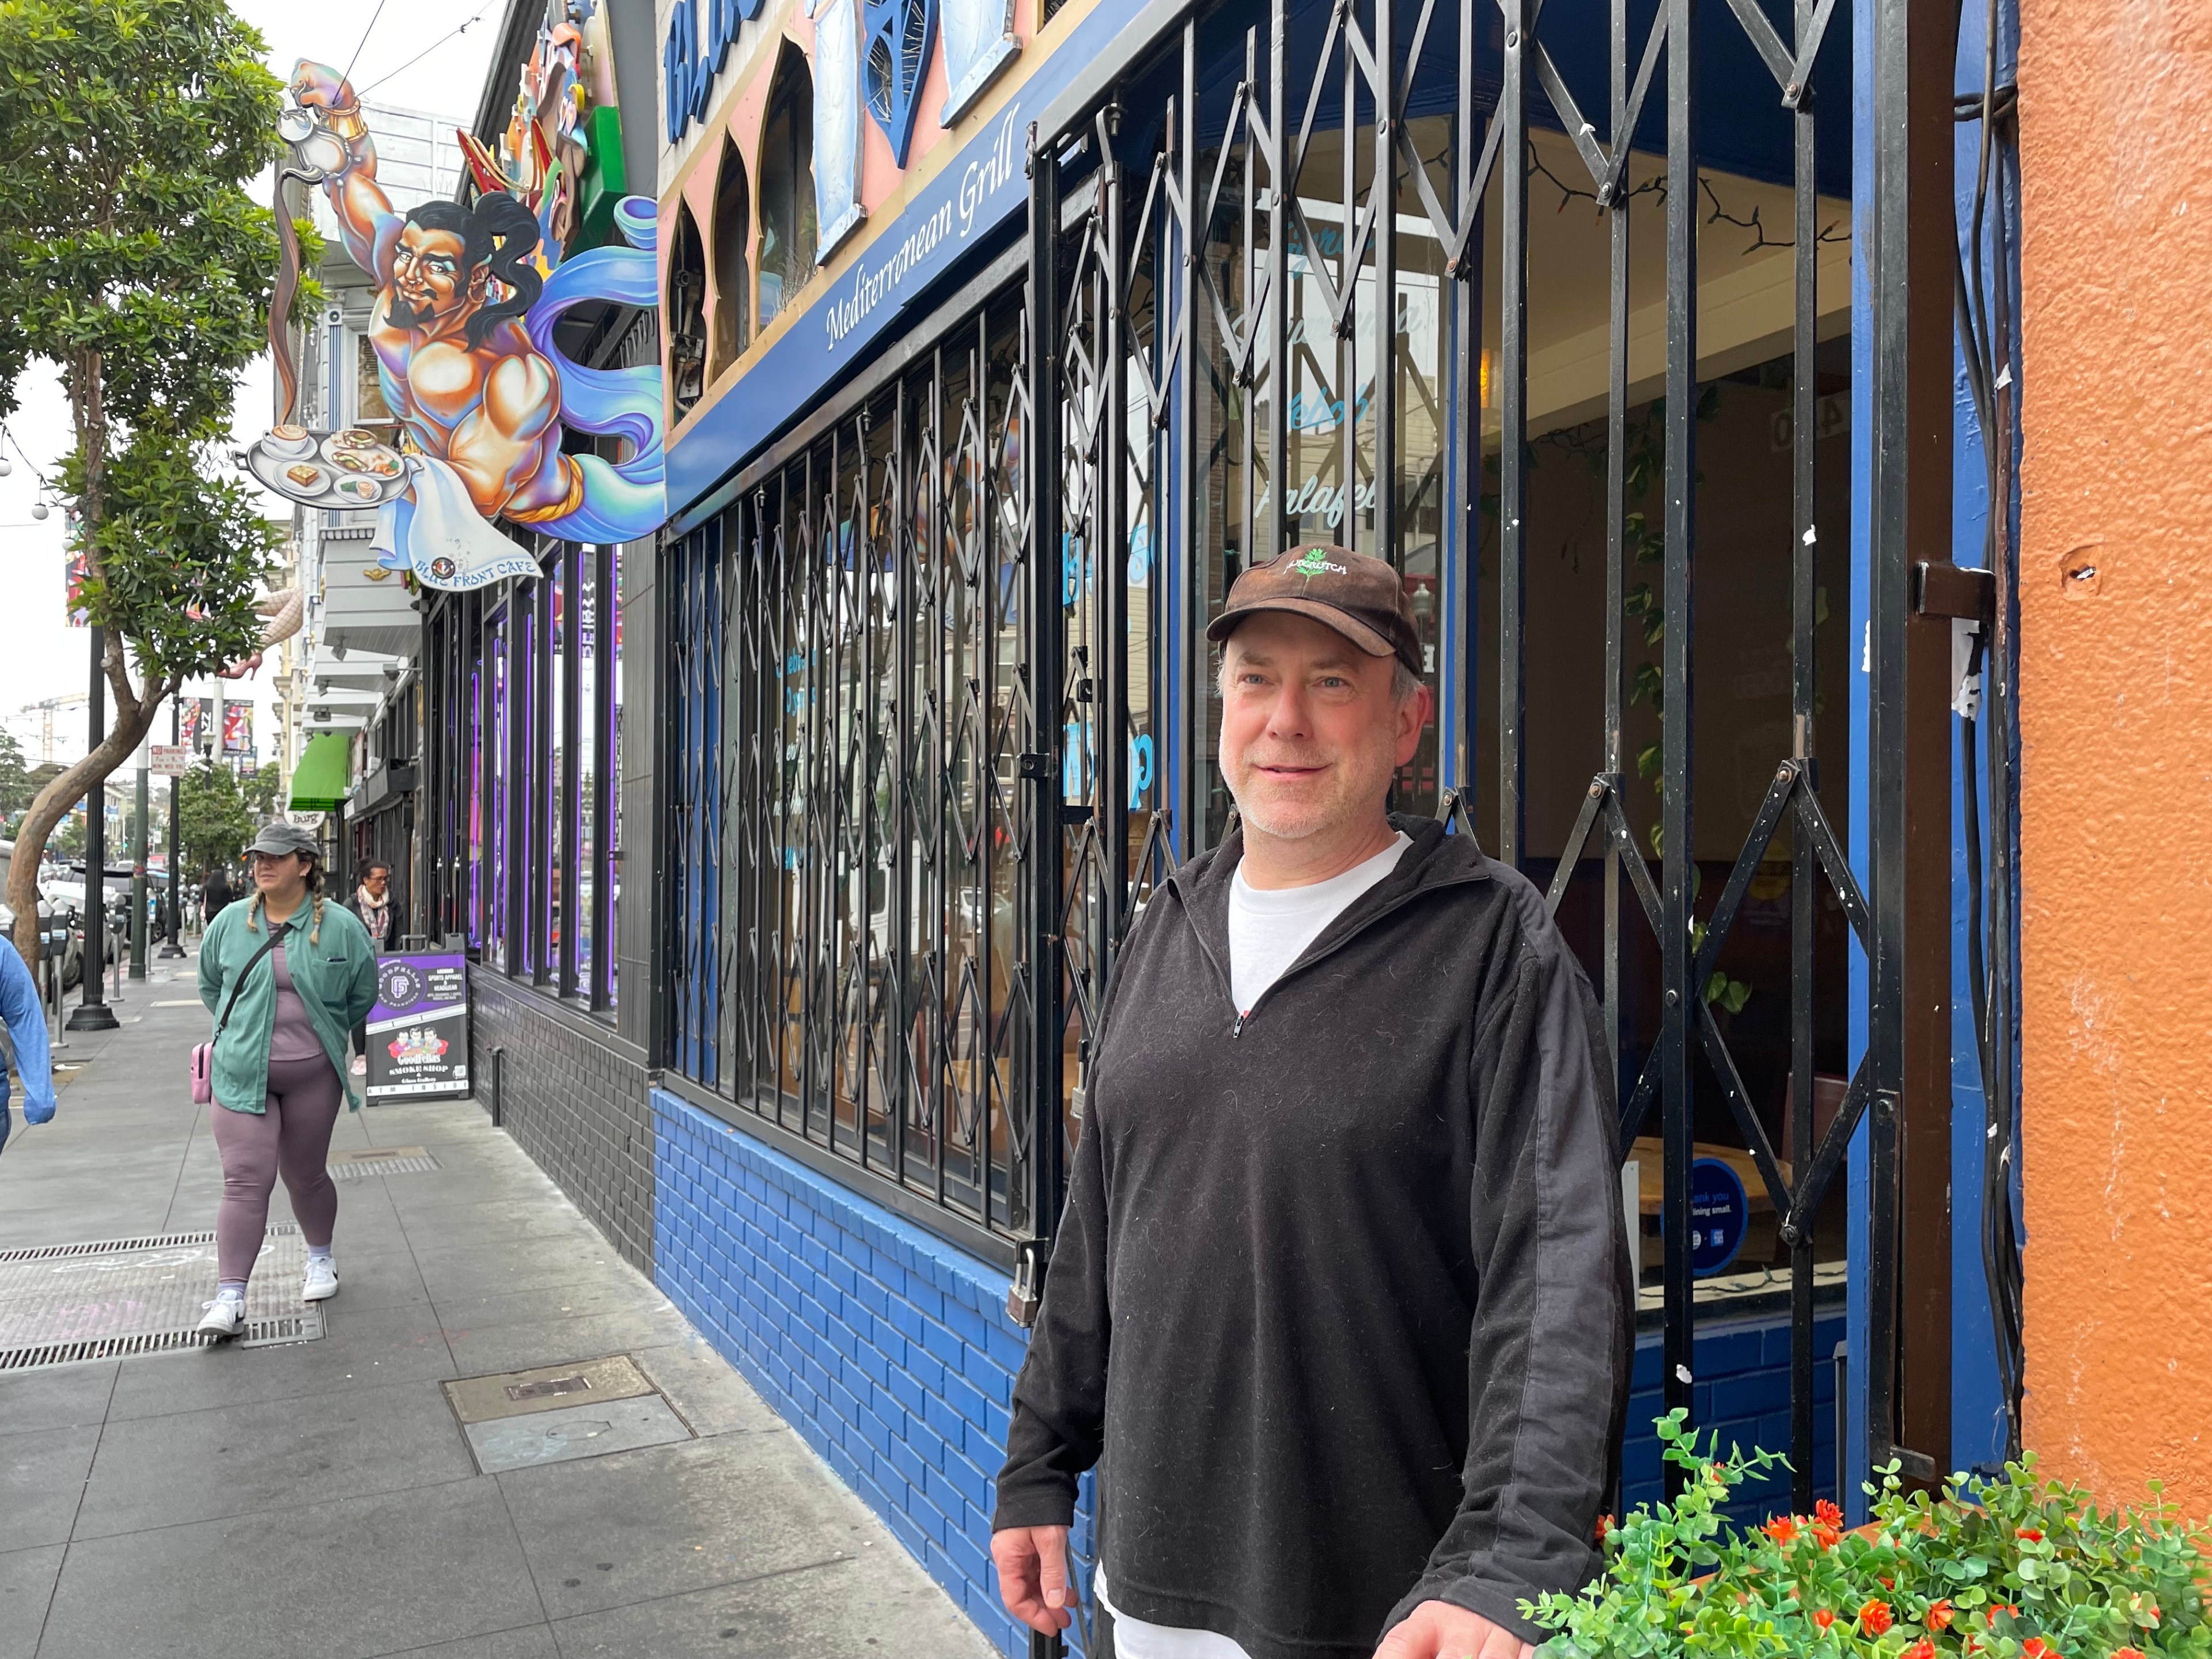 A man stands in front of a restaurant.